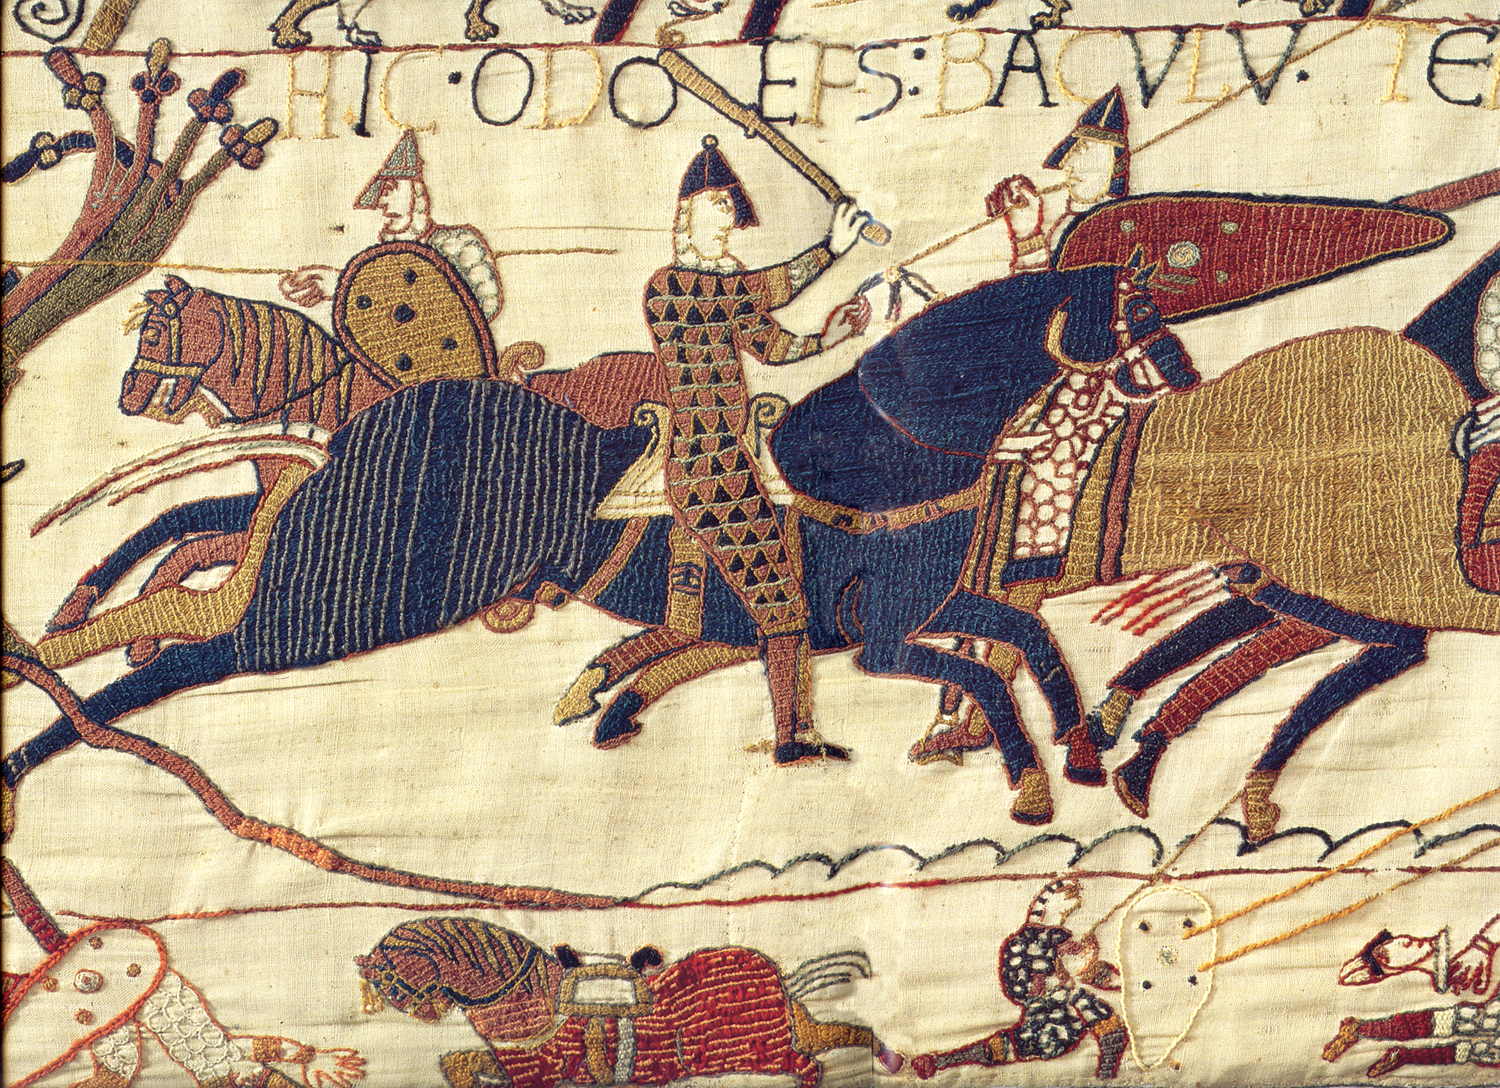 In the Bayeux Tapestry, the riders are clearly wearing spurs.